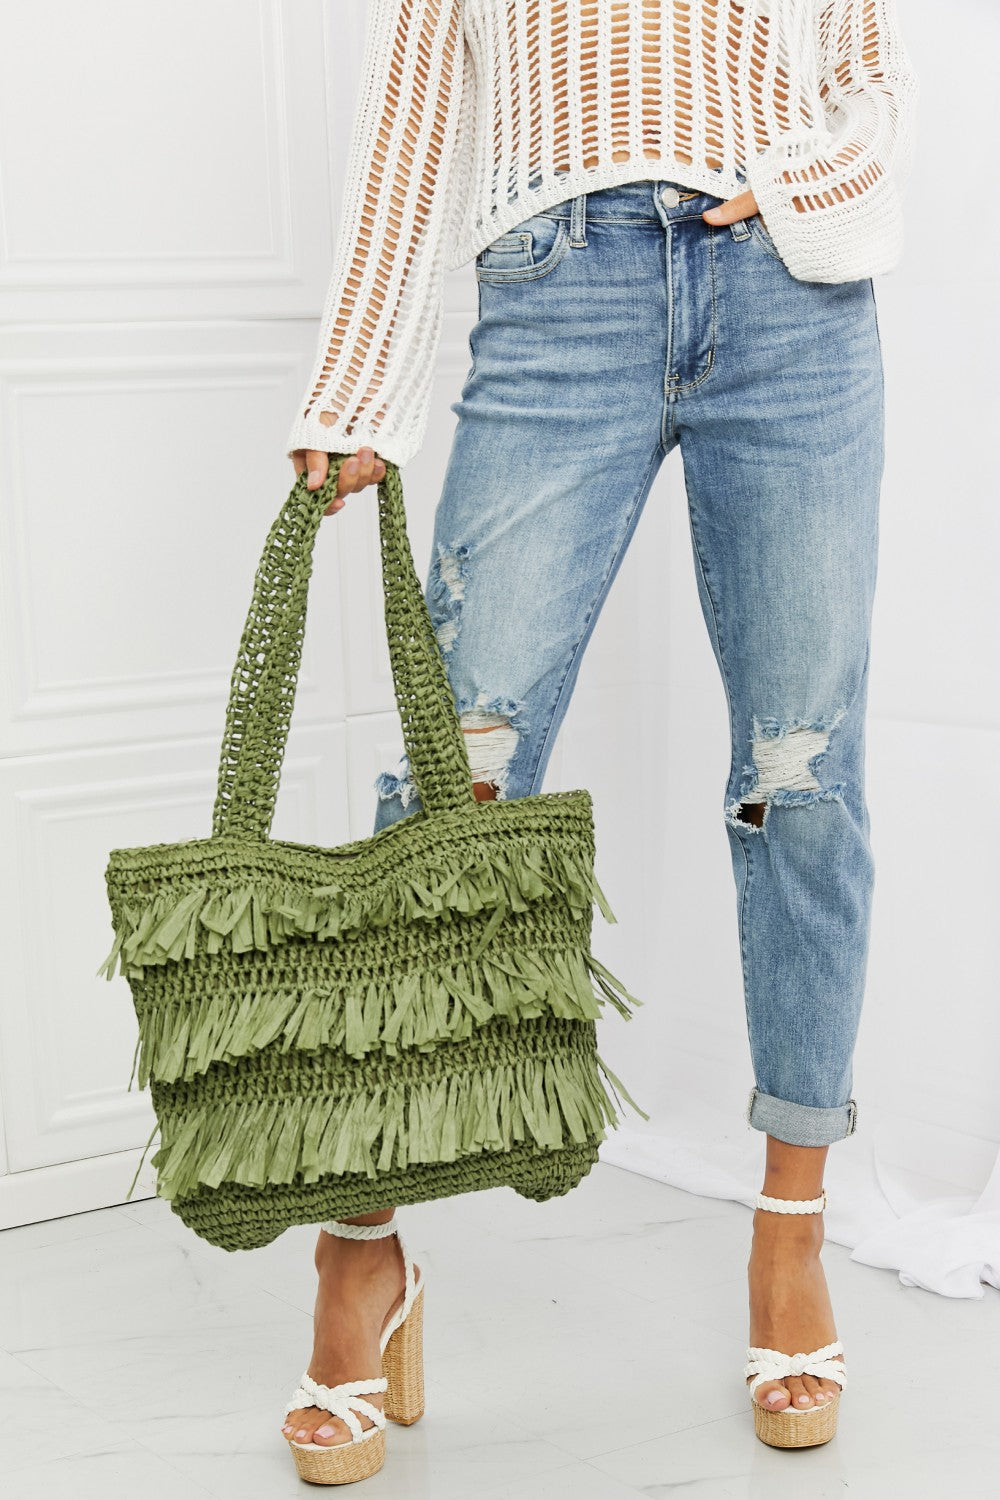 OLIVE ONE SIZE - Fame The Last Straw Fringe Straw Tote Bag - Ships from The US - Tote bags at TFC&H Co.